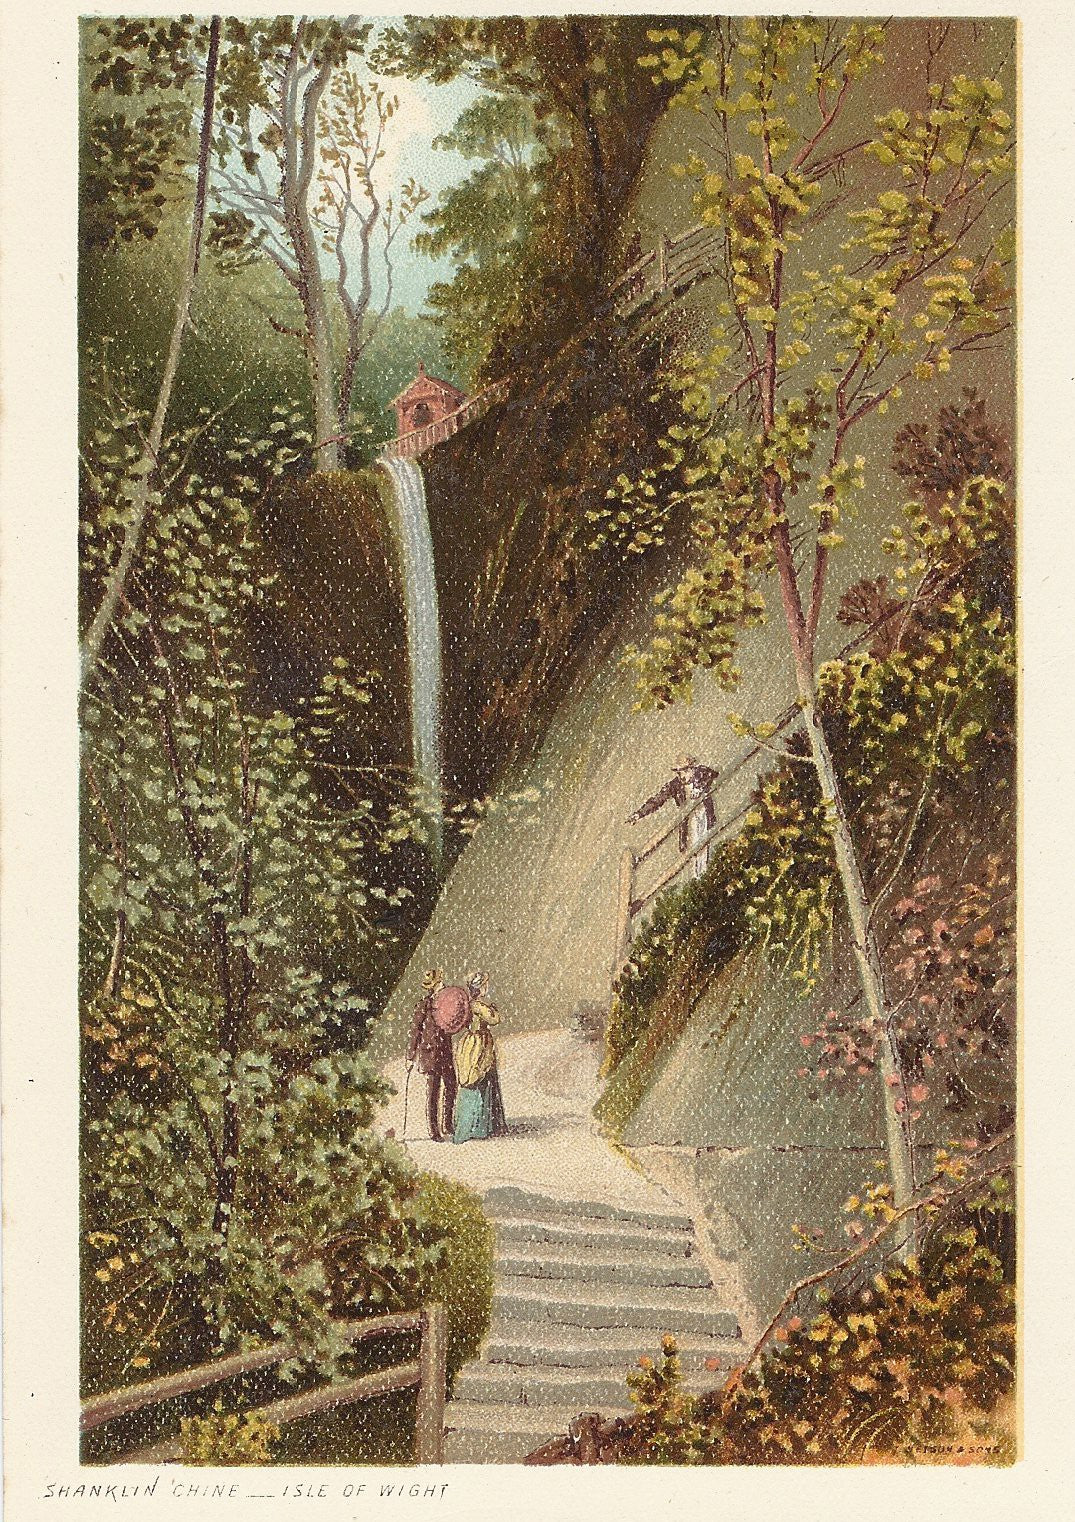 Shanklin Chine Isle of Wight antique print 1889